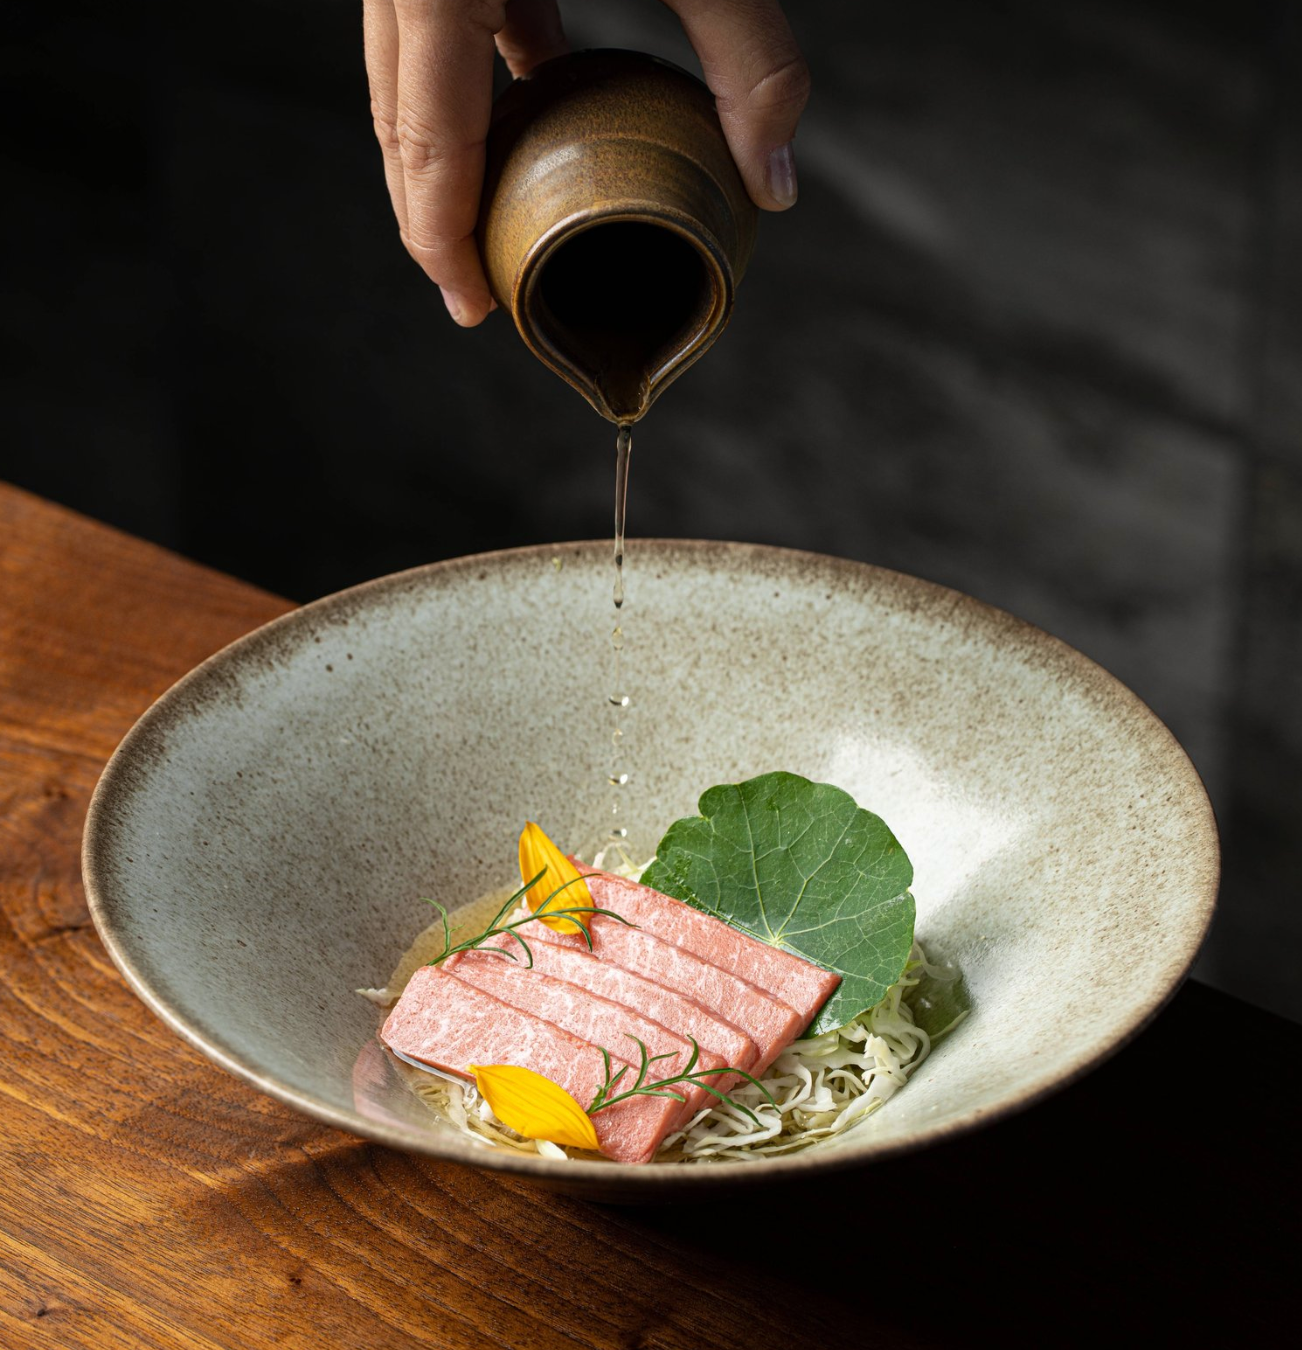 cultivated tuna being served in a dish with sauce